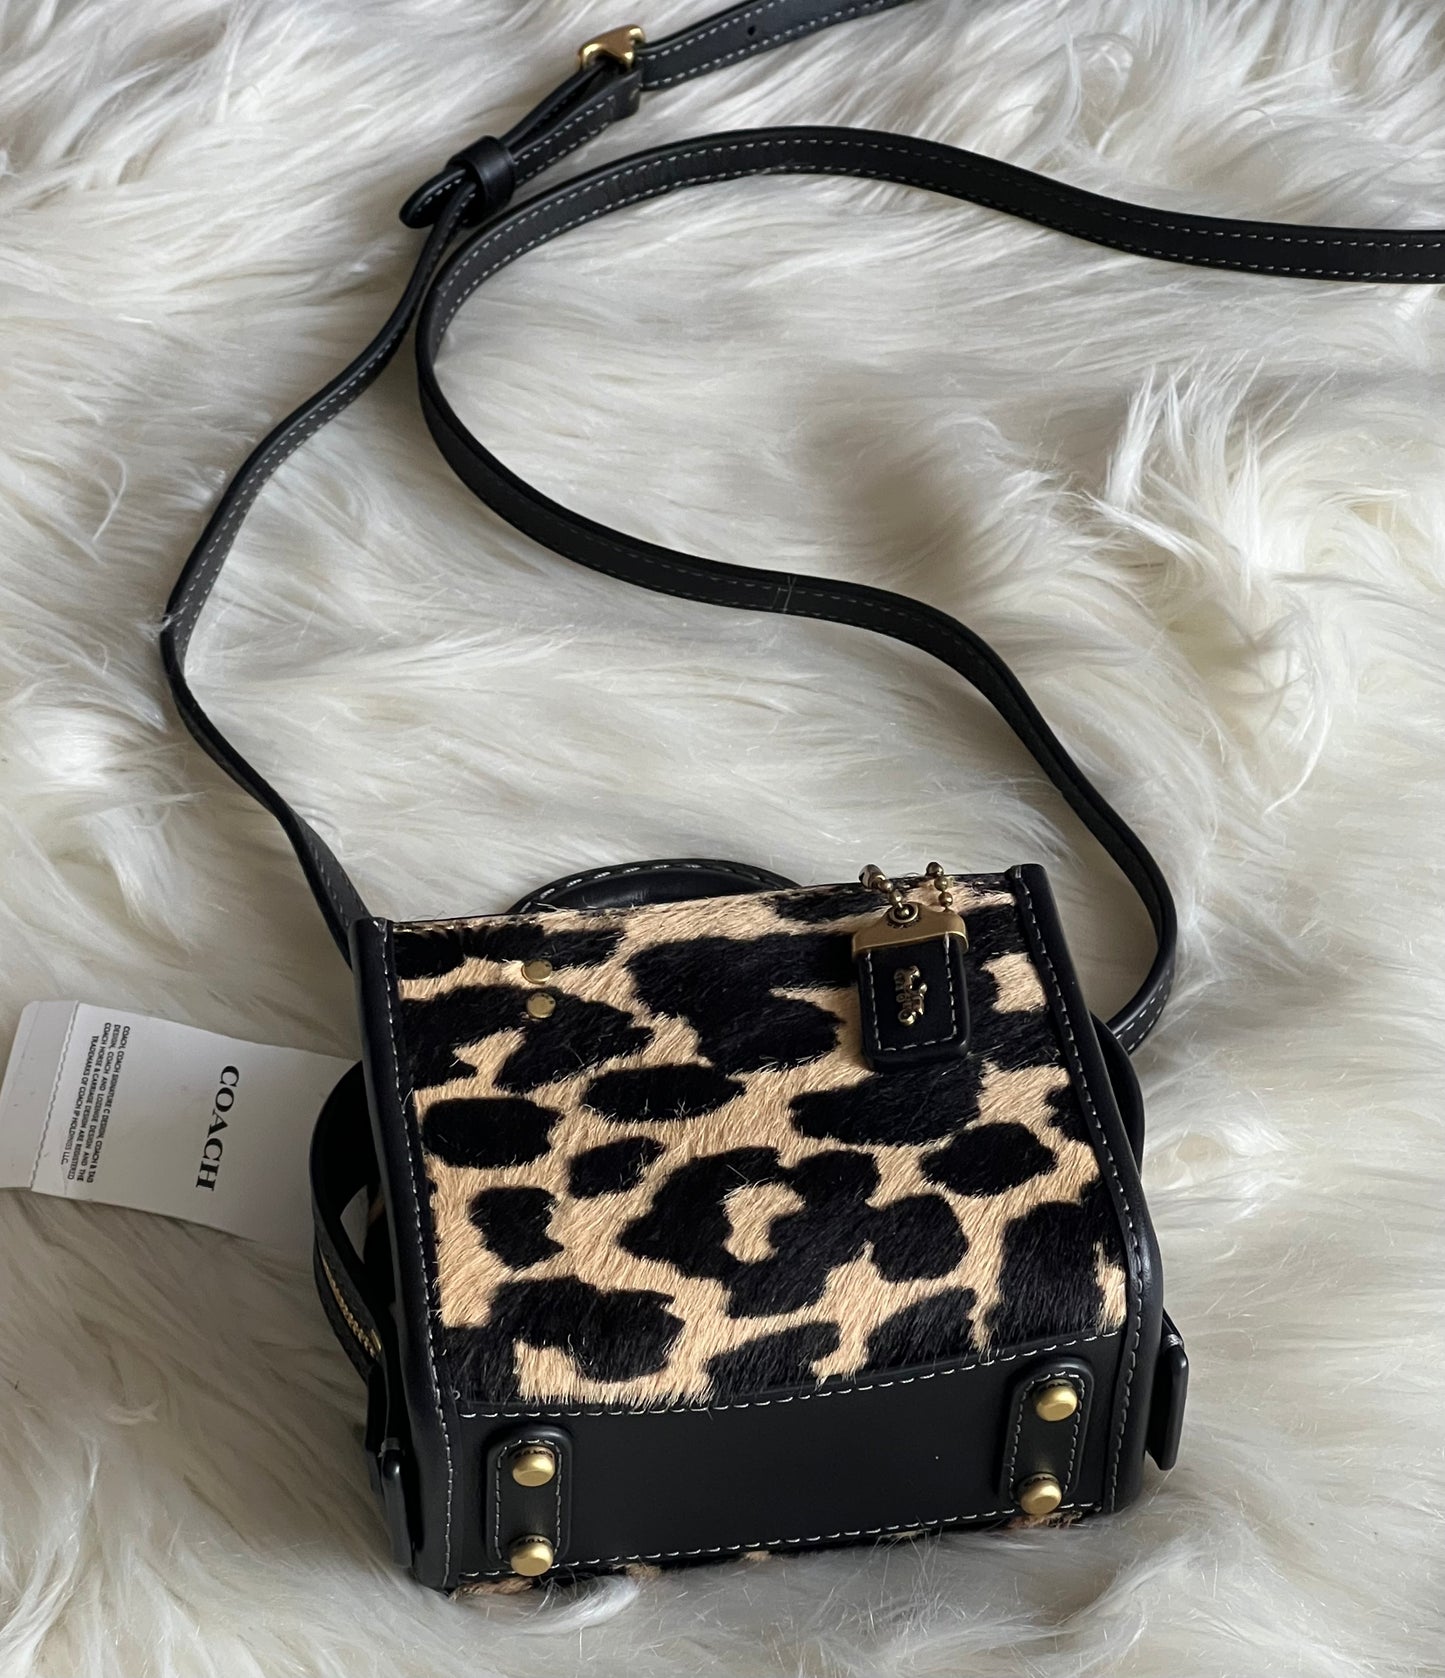 Coach Rogue 12 in Haircalf with Leopard Print